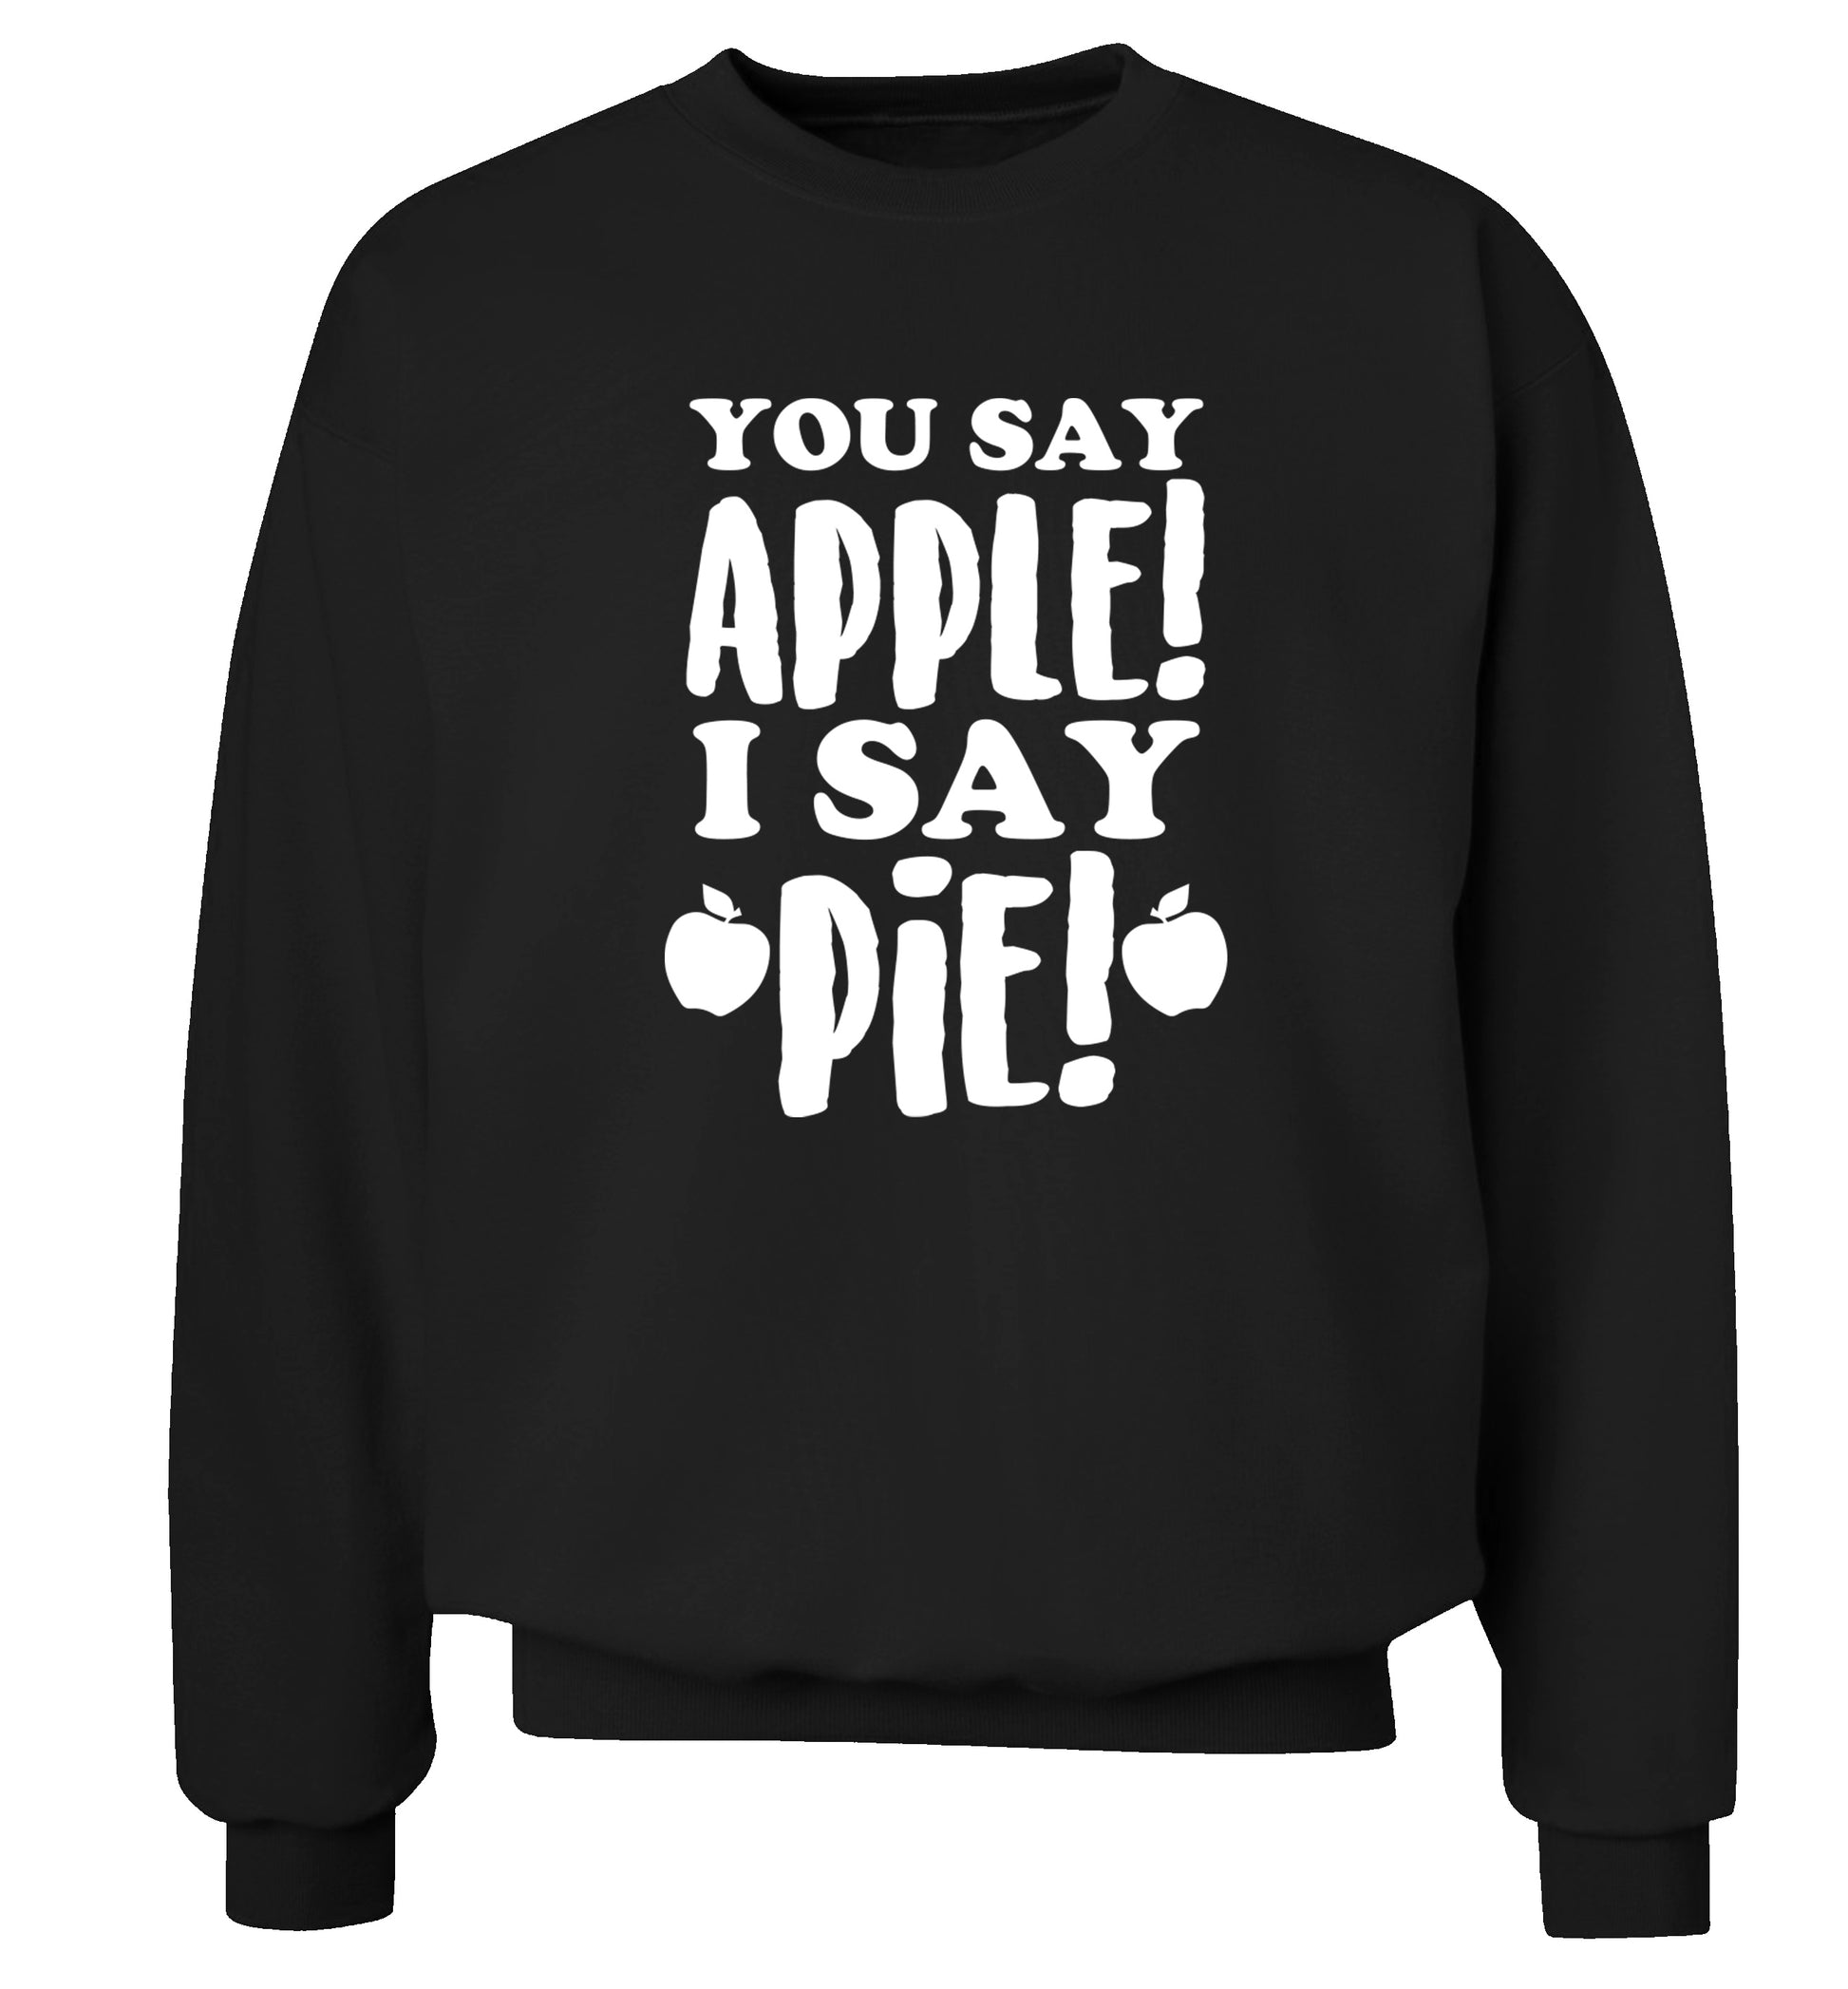 You say apple I say pie! Adult's unisex black Sweater 2XL